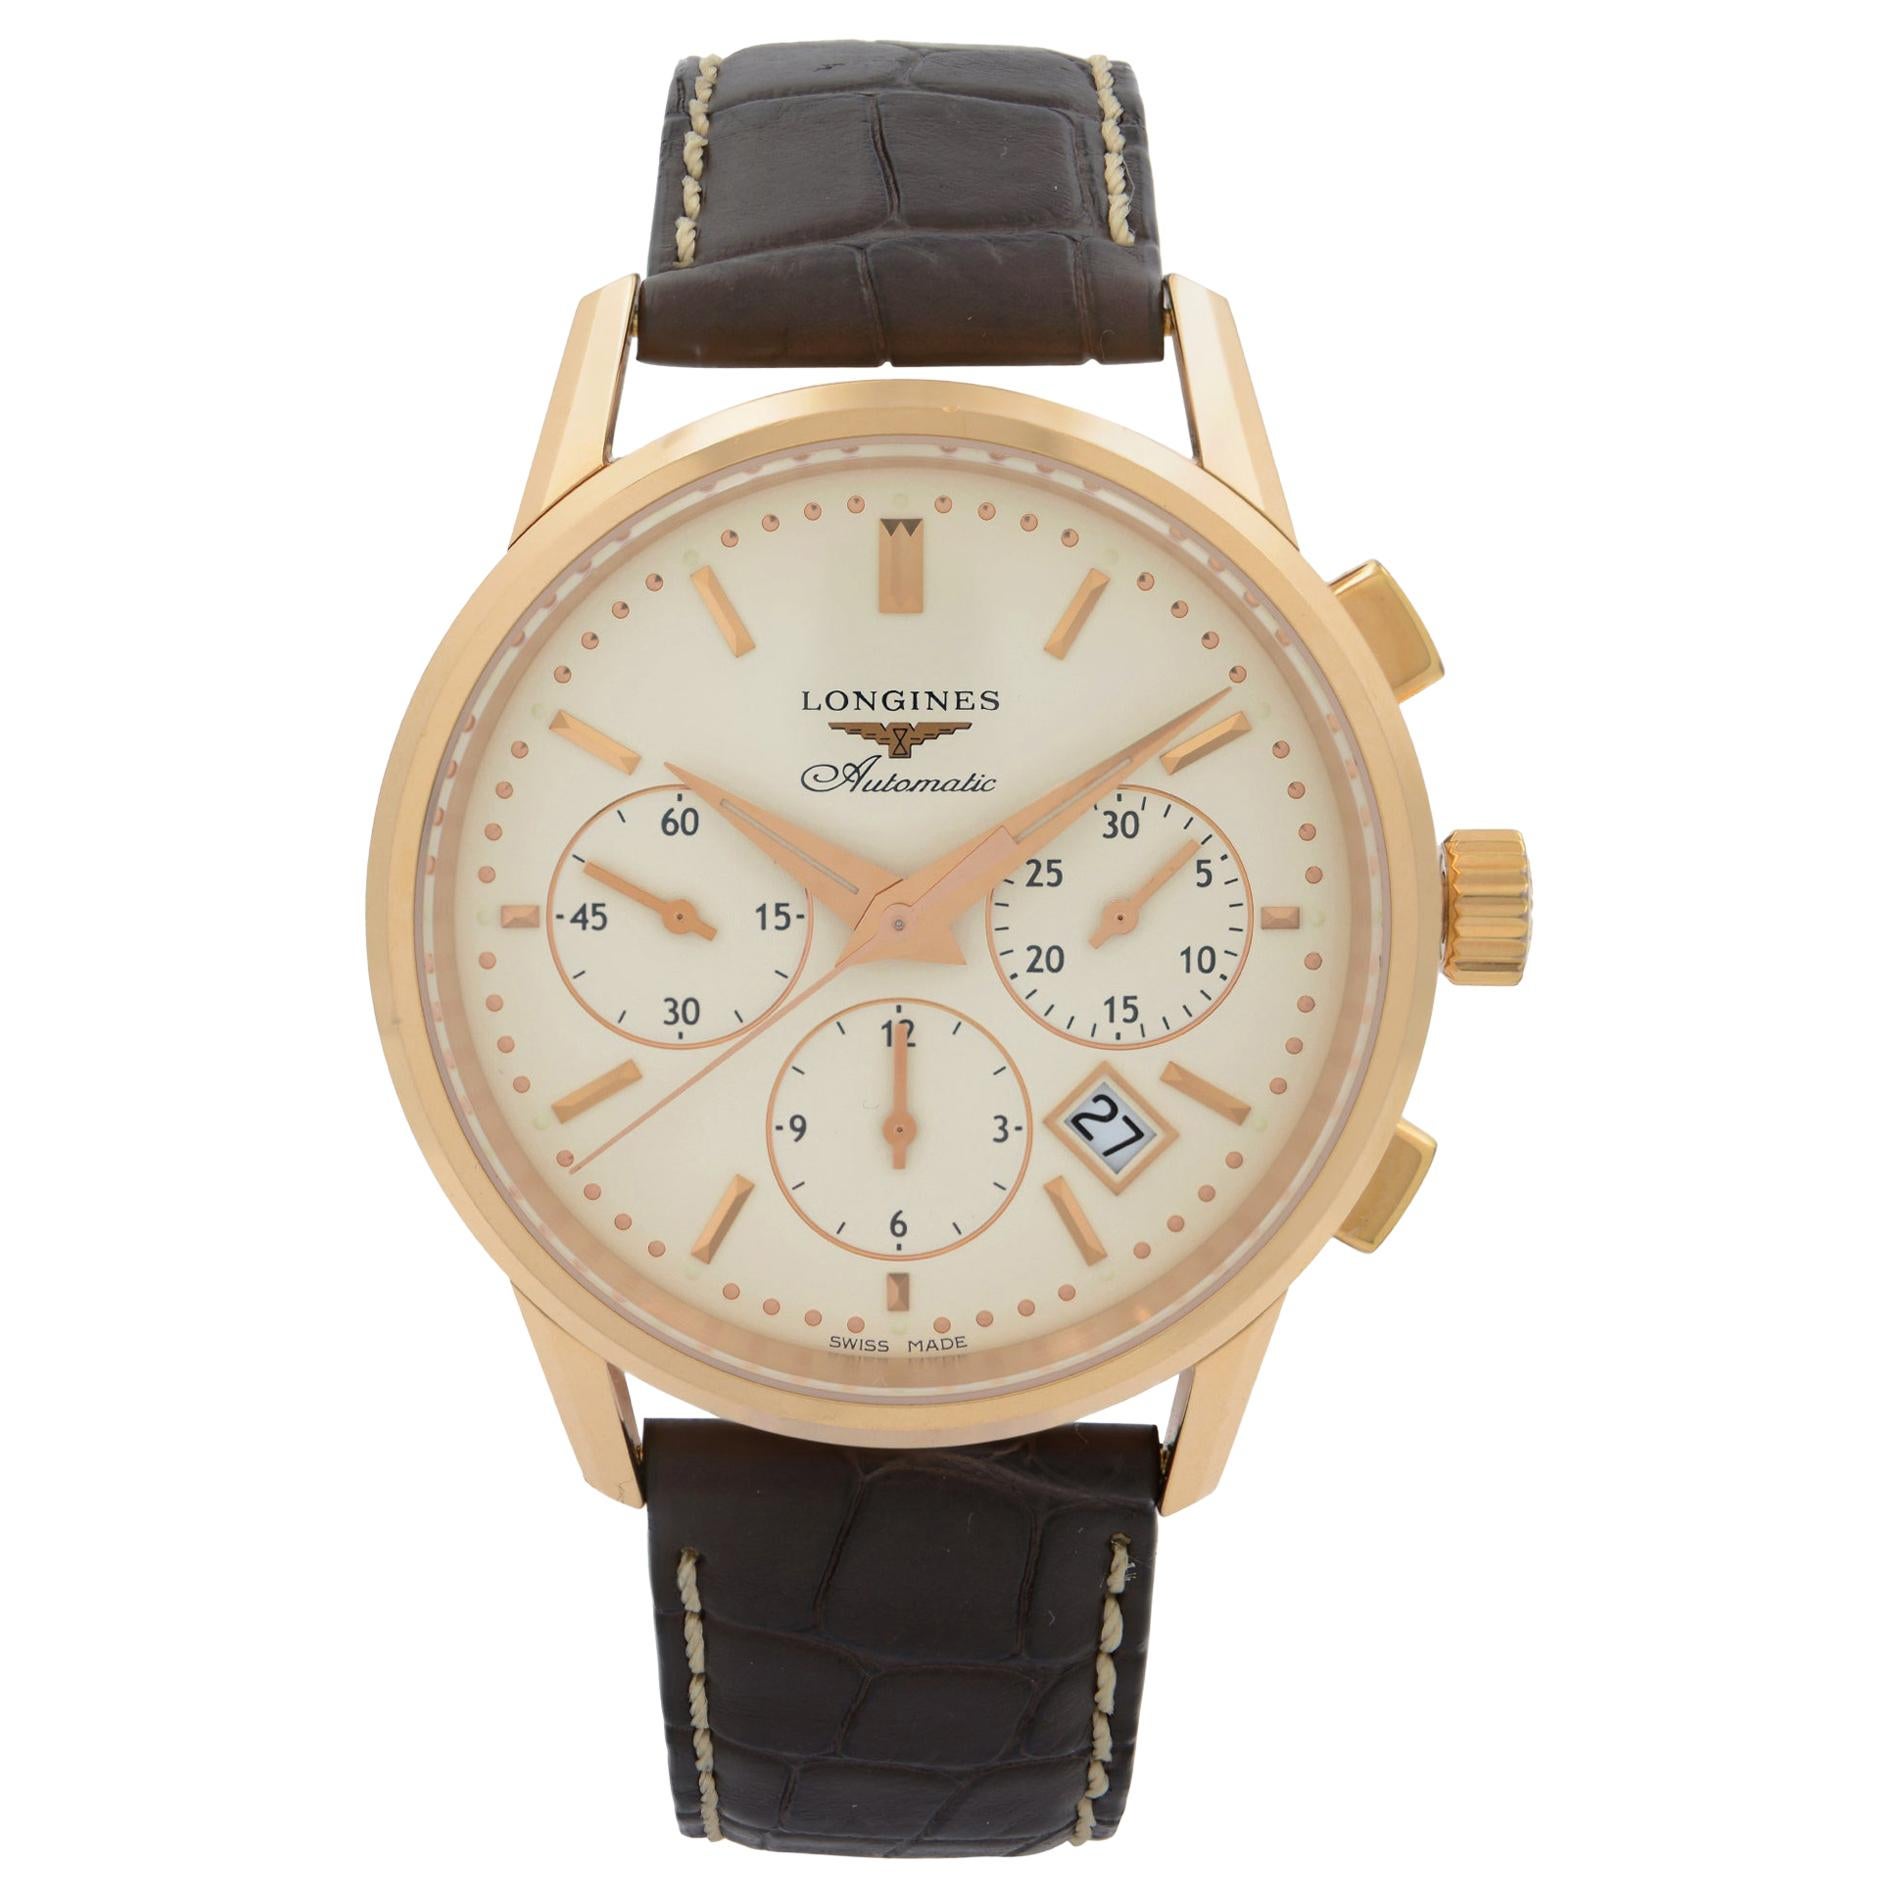 Longines Heritage Chronograph 18k Rose Gold Cream Dial Mens Watch L2.749.8.72.2